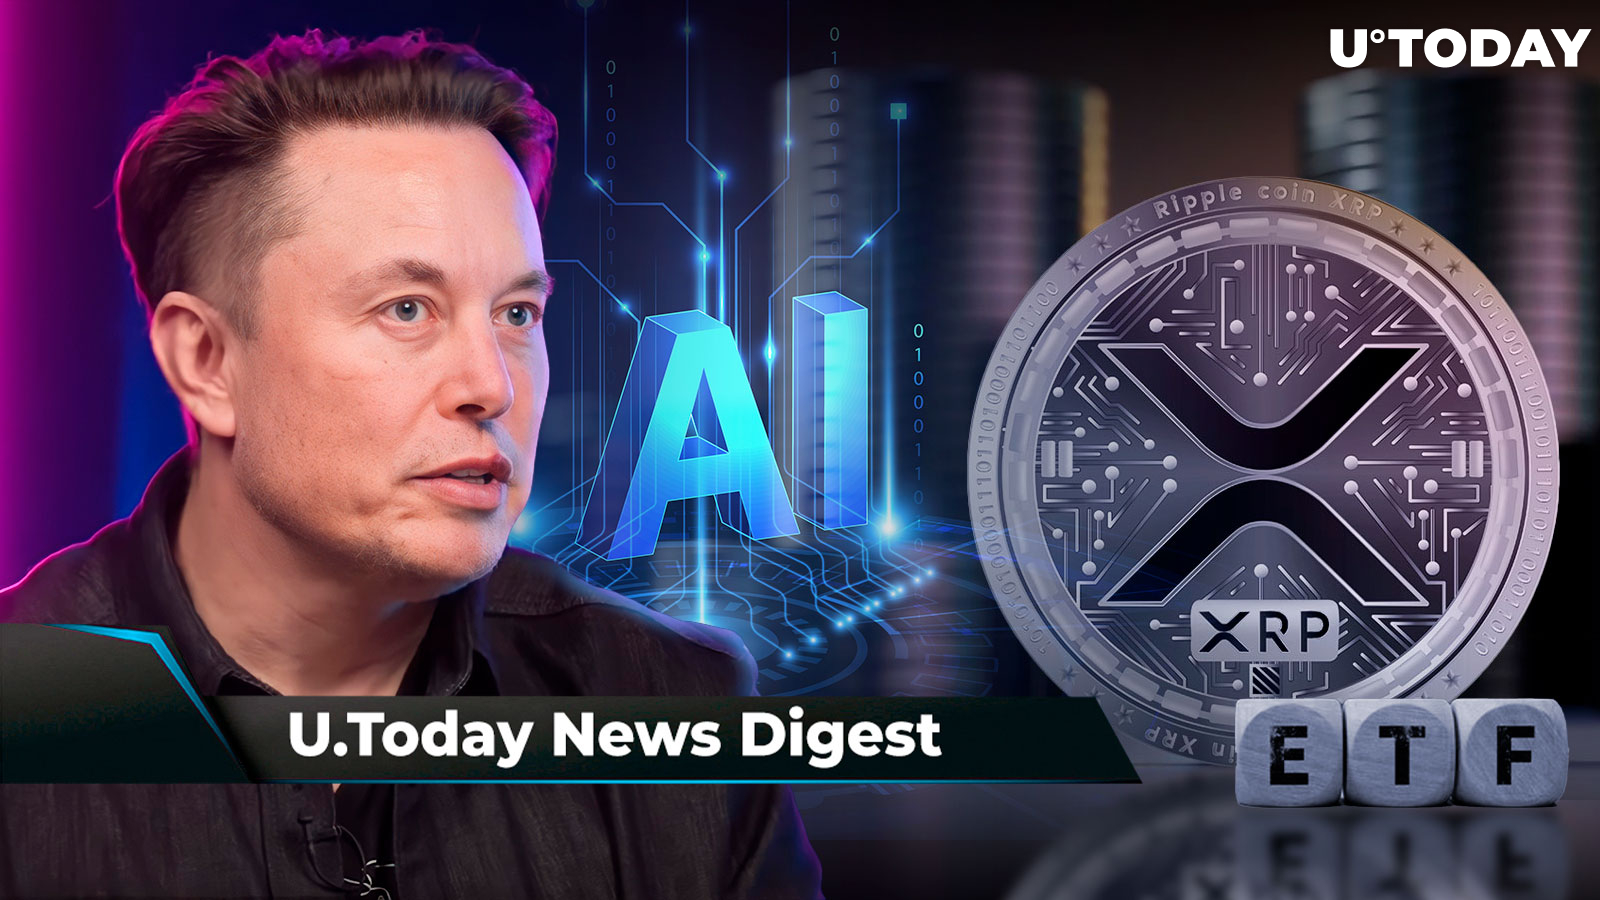 XRP ETF Might Be on Horizon, Per This Hint; Elon Musk's Shocking AI Prediction Stuns Community, SHIB Emerges as Meme Coin Leader: Crypto News Digest by U.Today